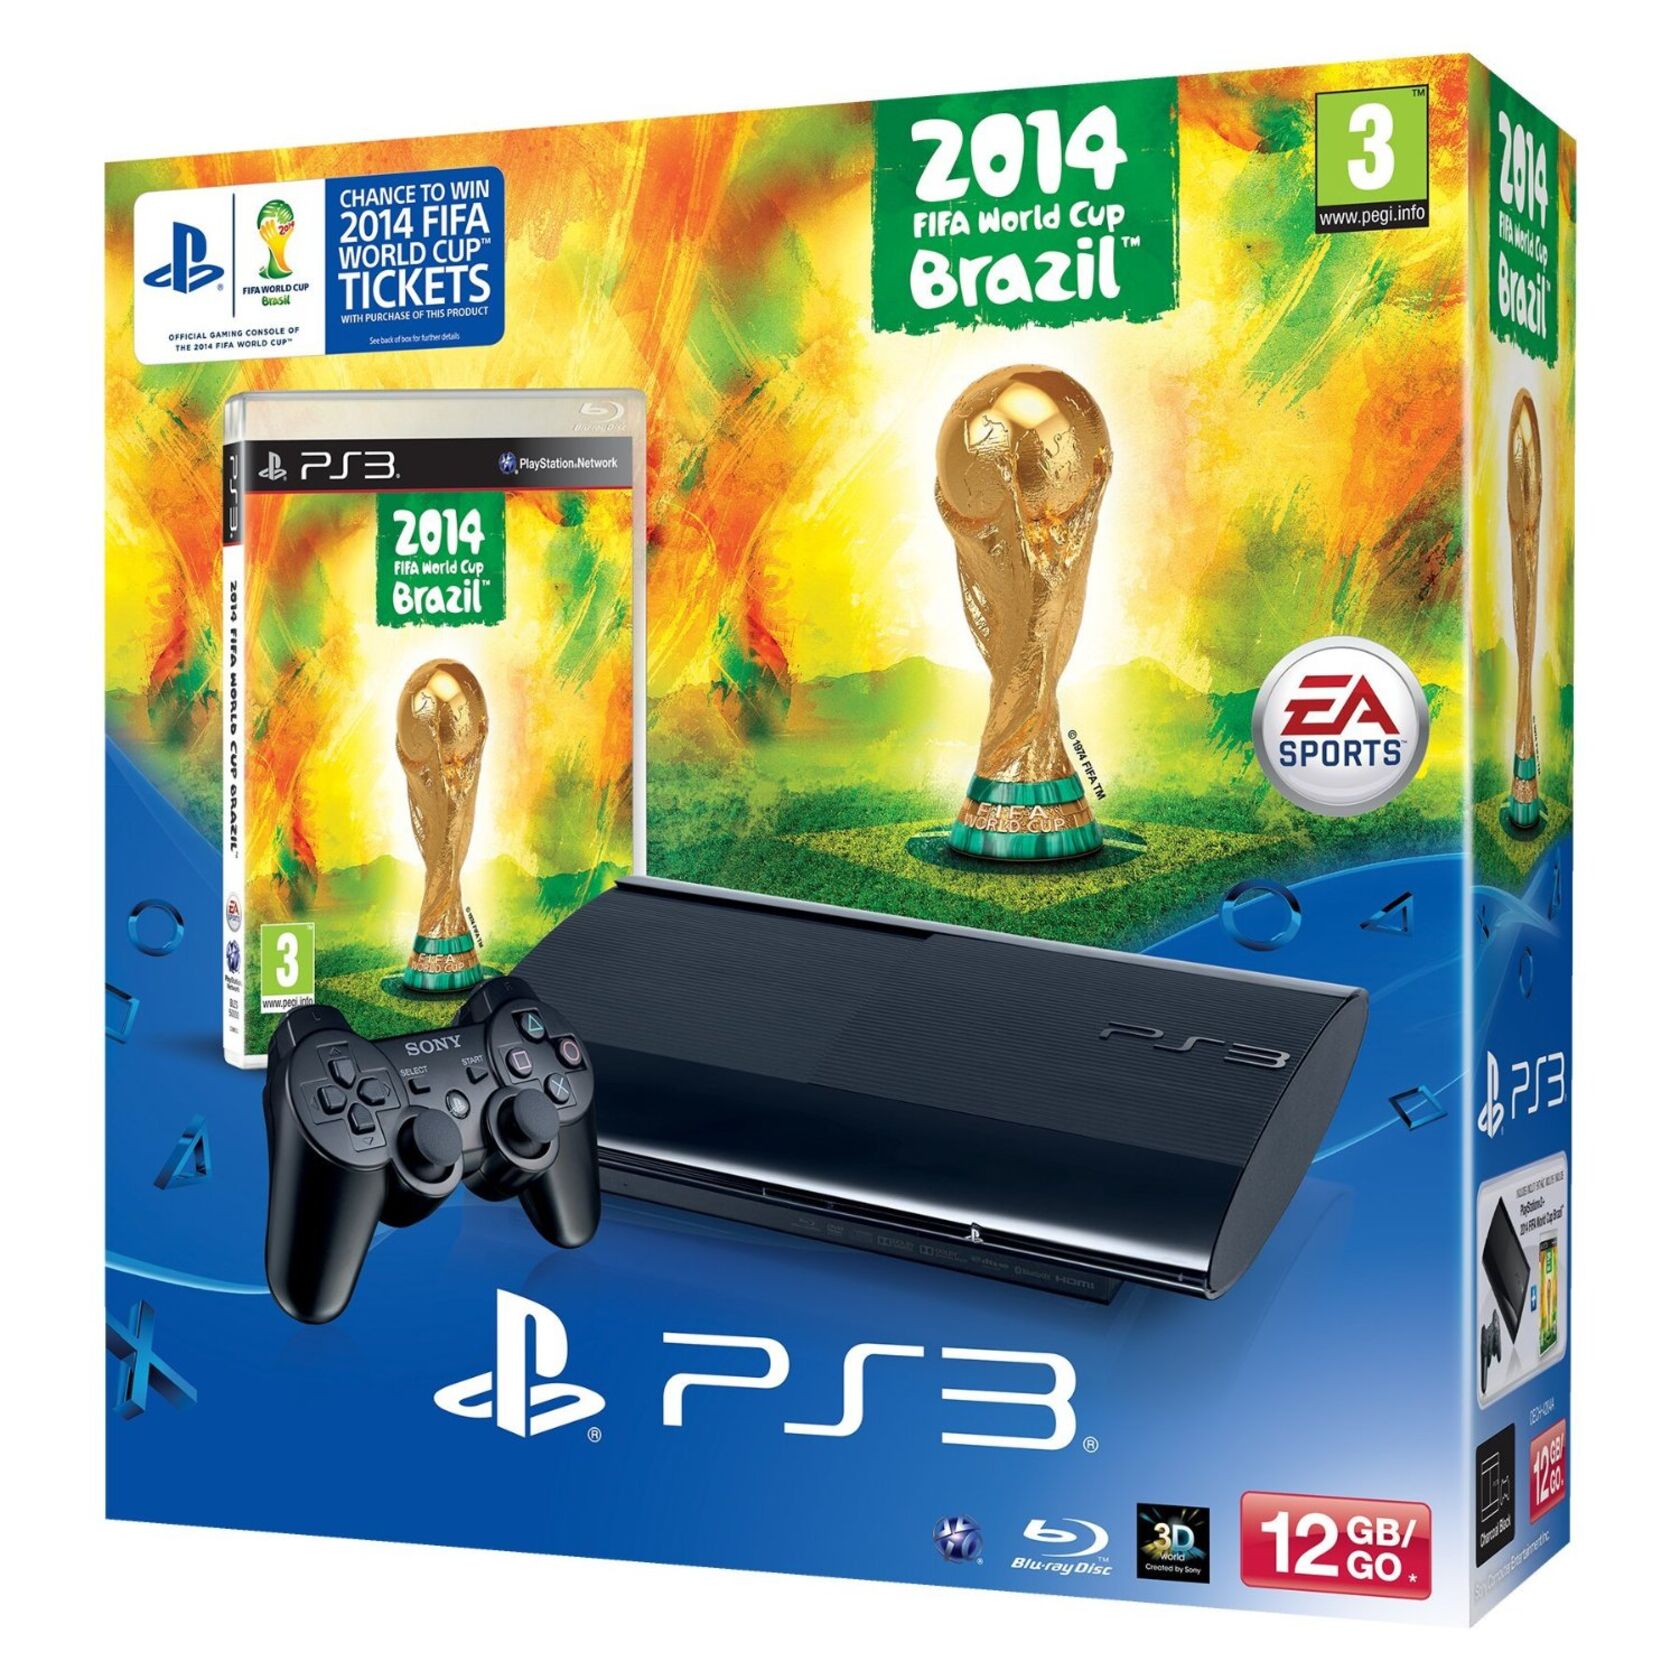 FIFA World Cup 2014 PS4 